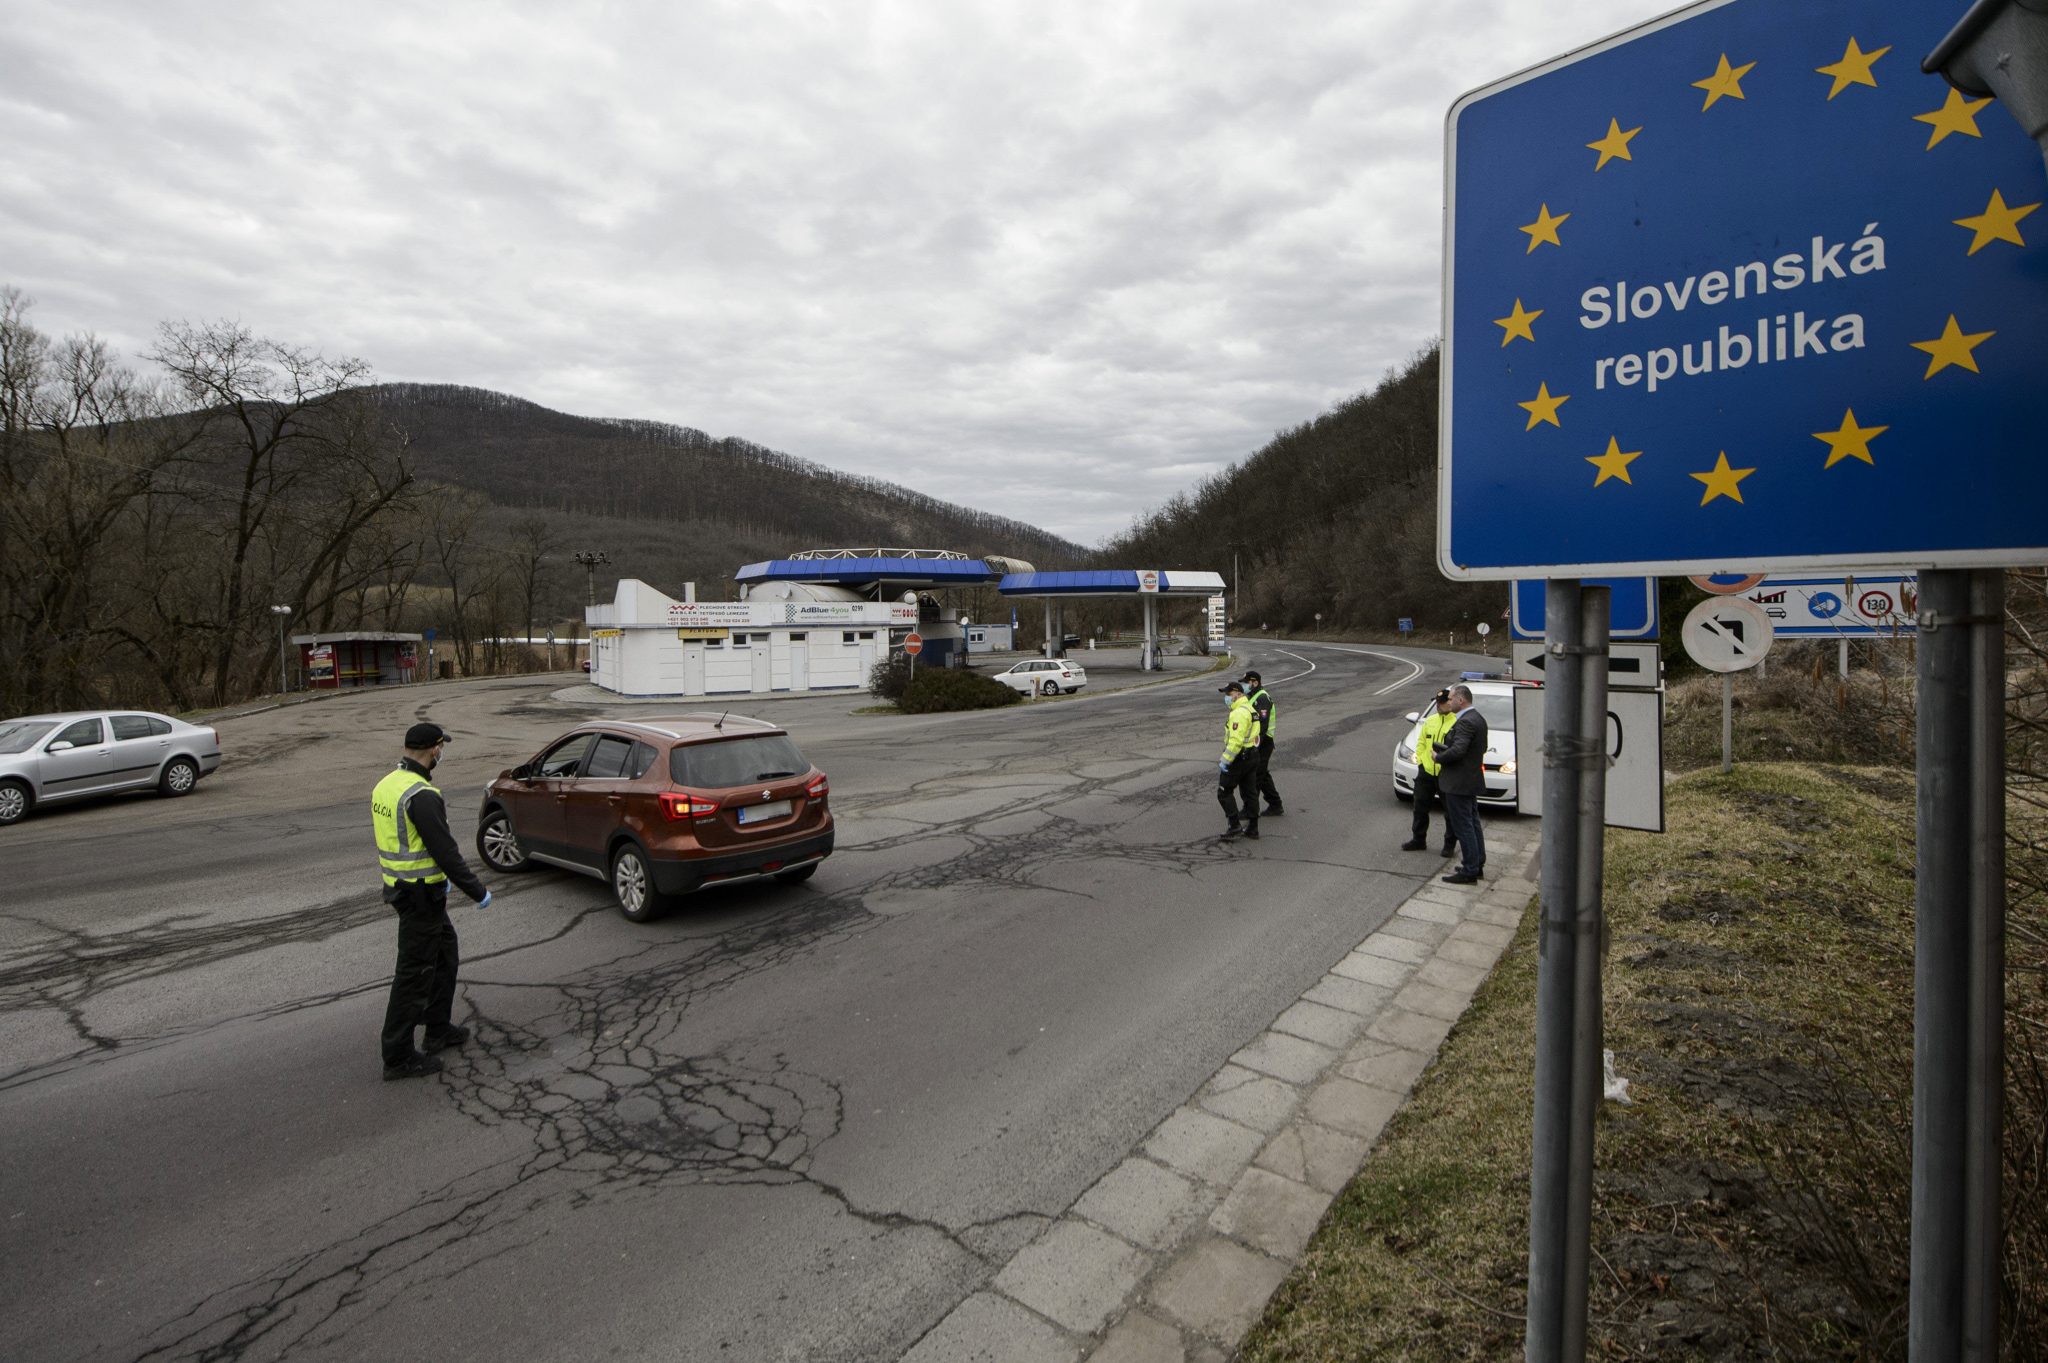 Czechia Forced to React to the Situation on the Czech-Slovak Border